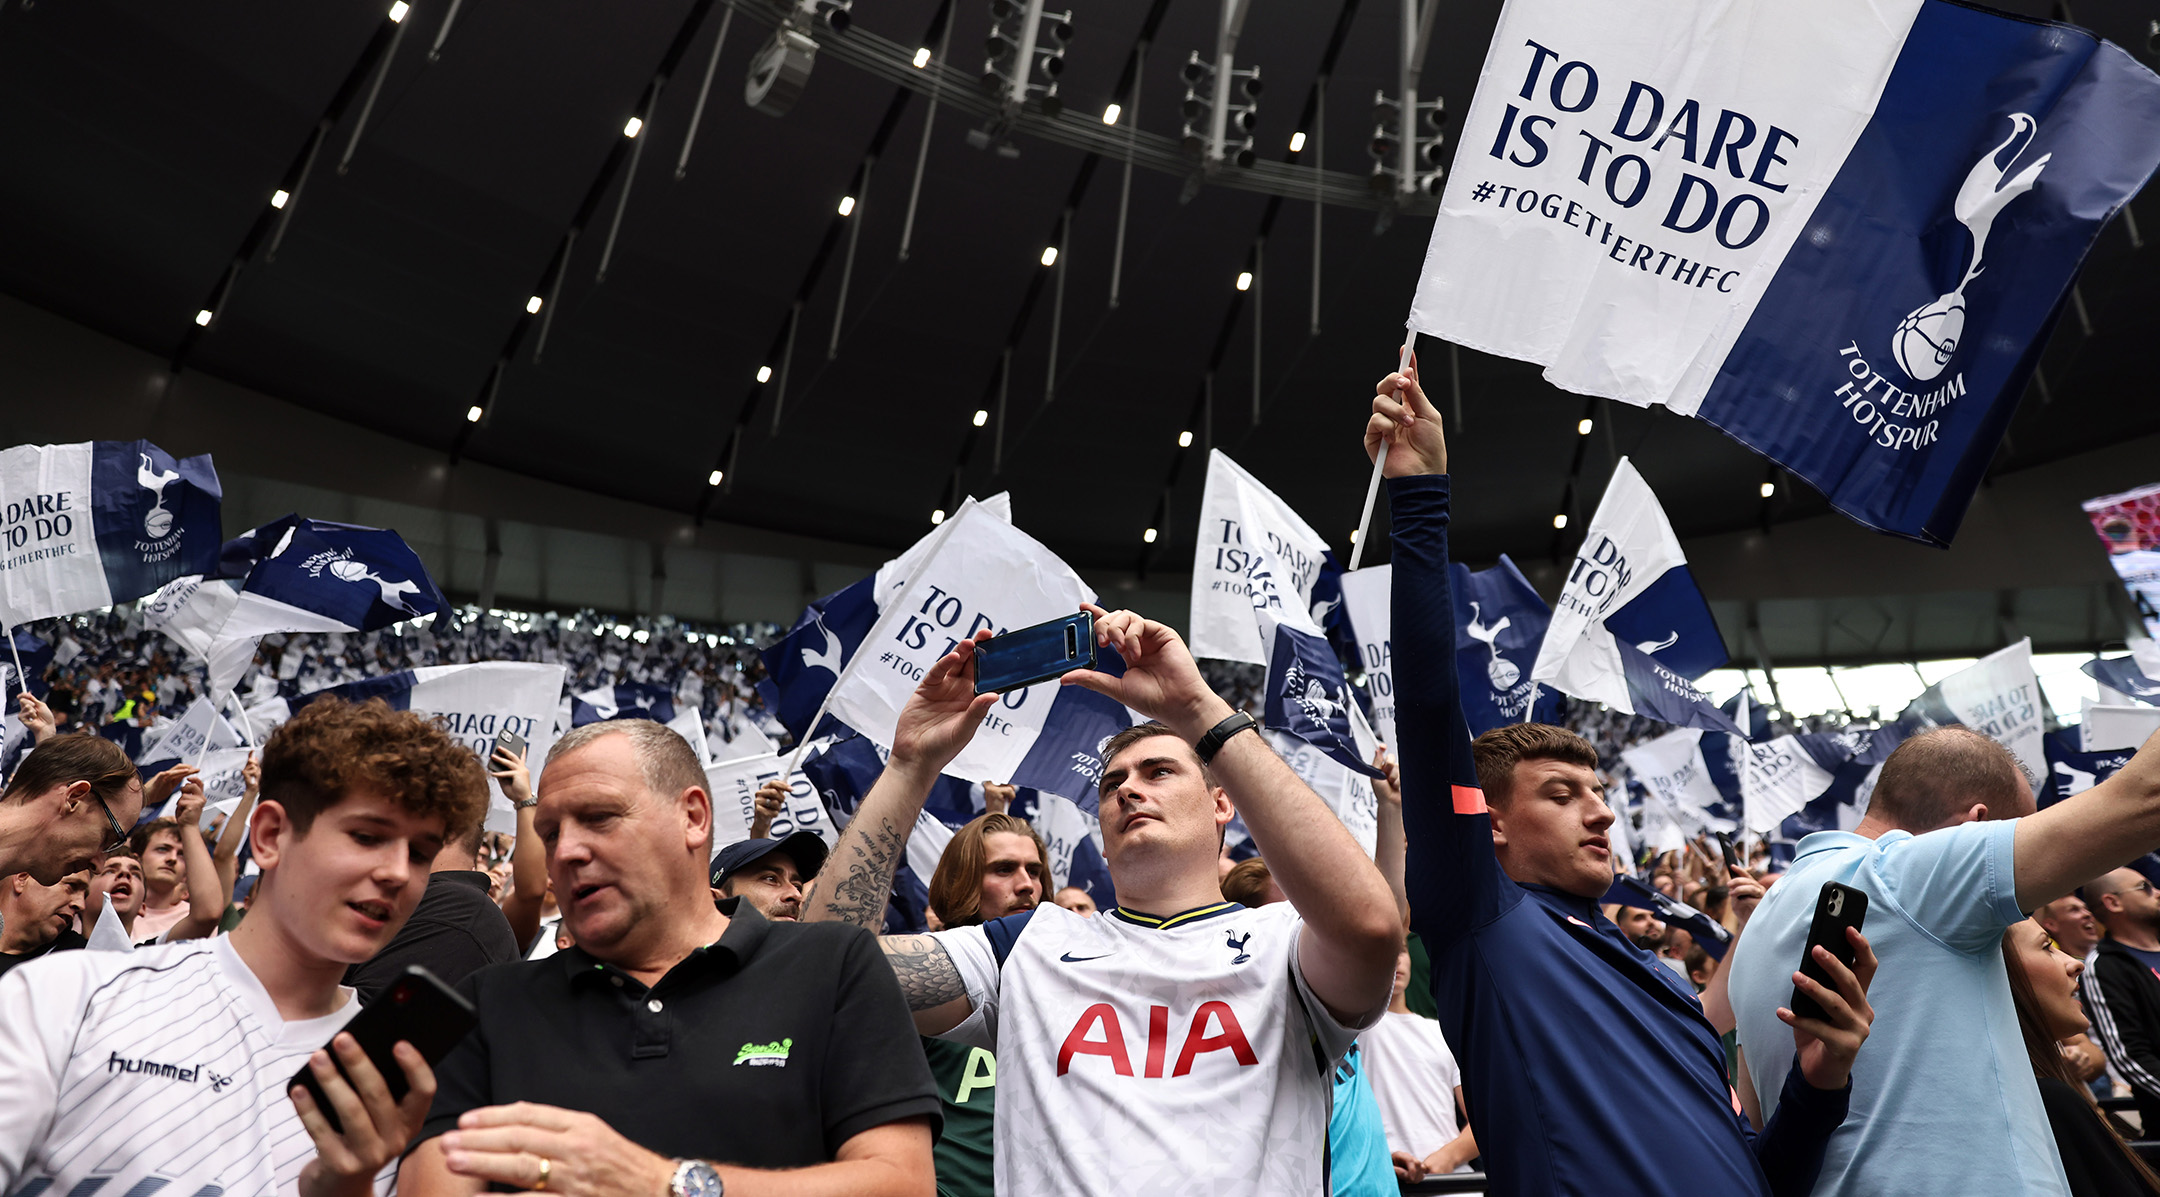 Tottenham fans have called themselves 'Yids.' This week, the British soccer team asked them to stop. - Jewish Agency